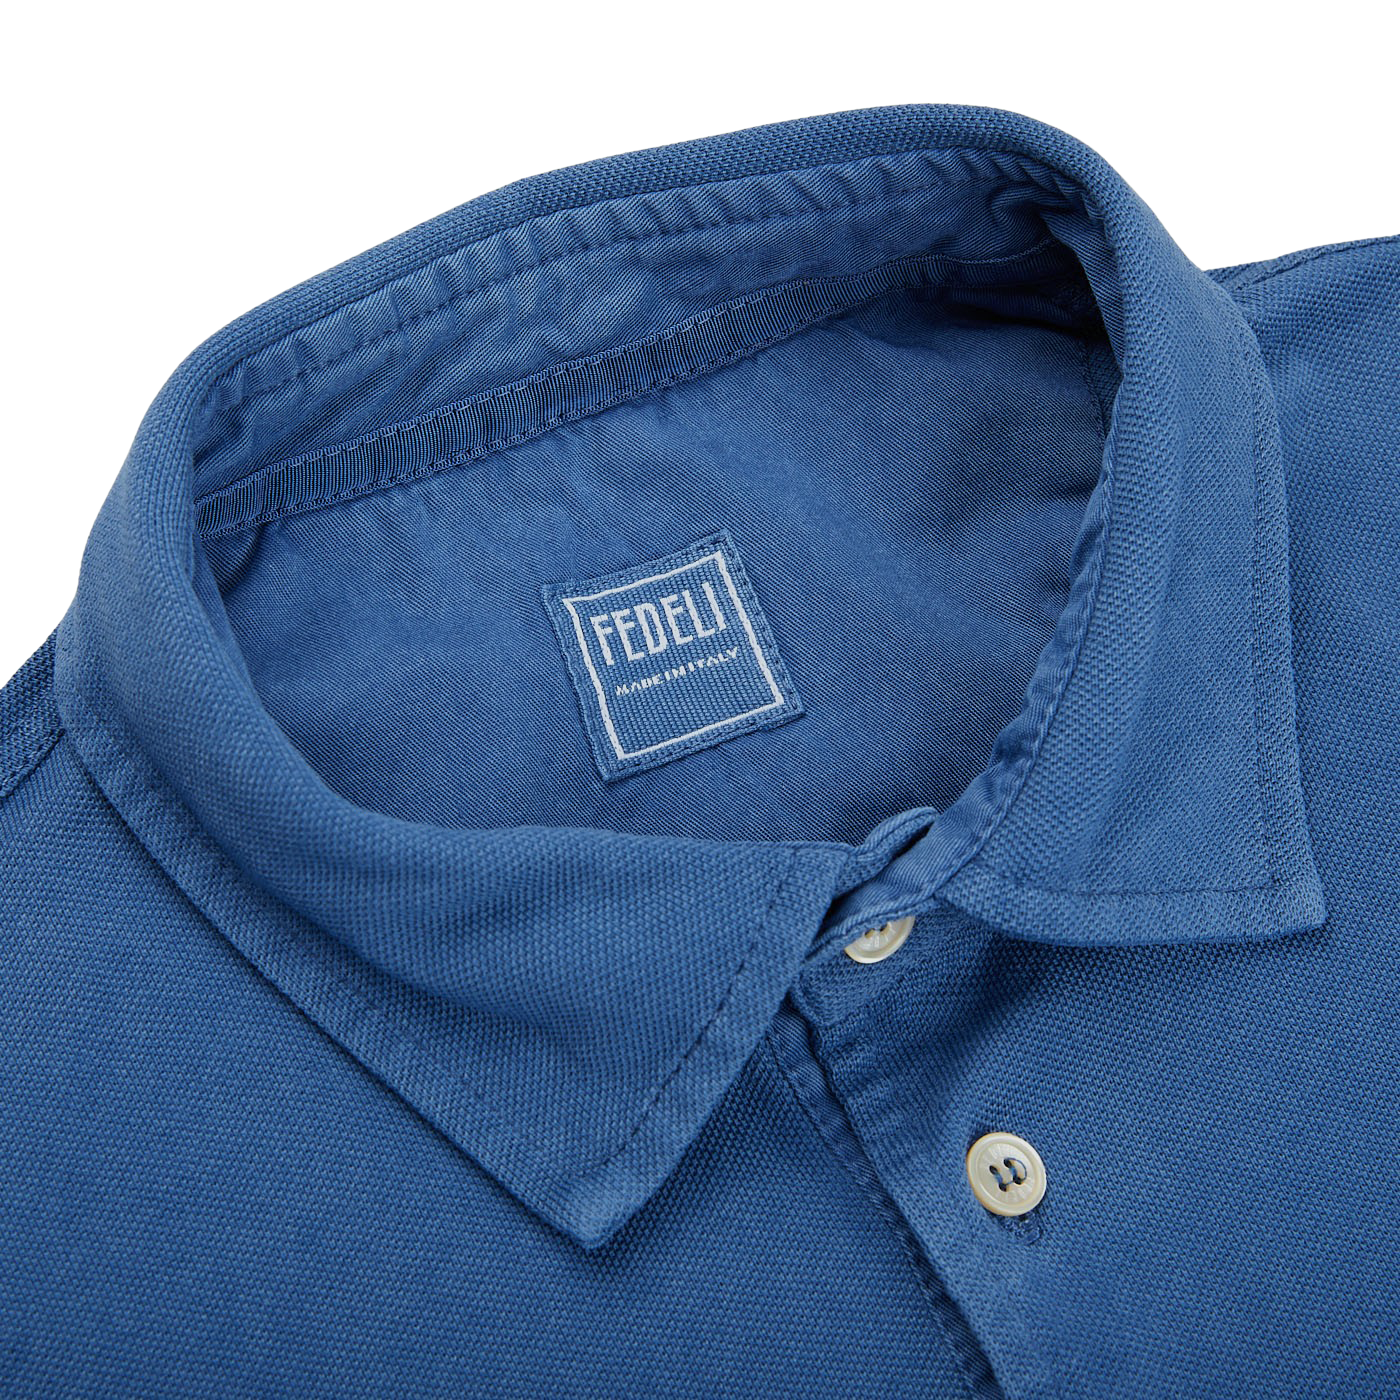 A Fedeli Washed Light Blue Cotton Pique Polo Shirt with a collar.